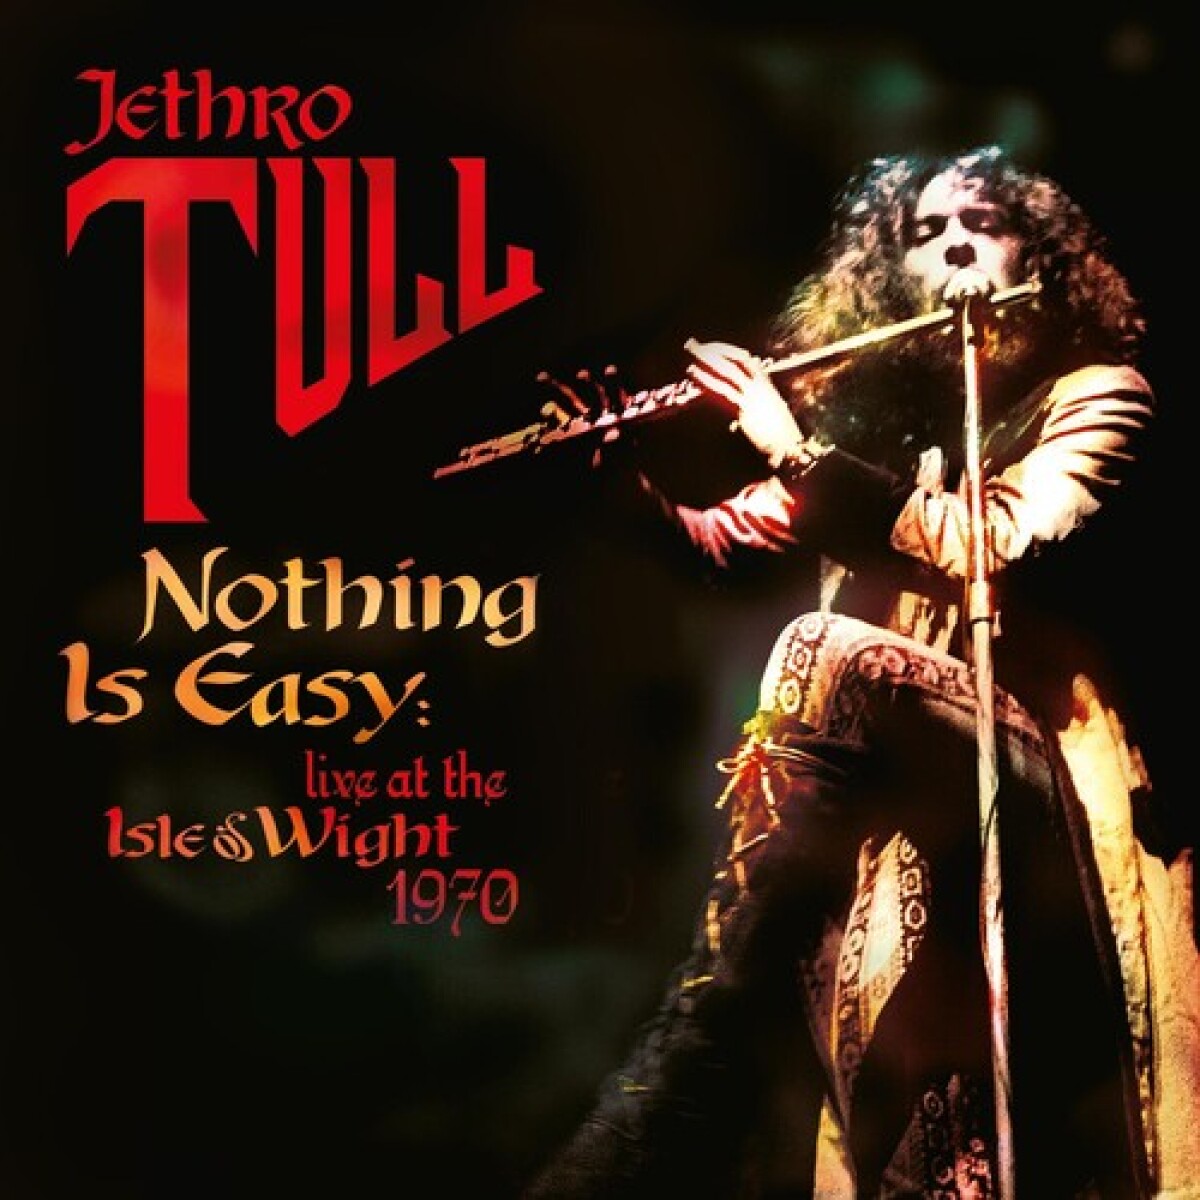 Jethro Tull - Live At The Isle Of Wight 1970 - Vinilo 